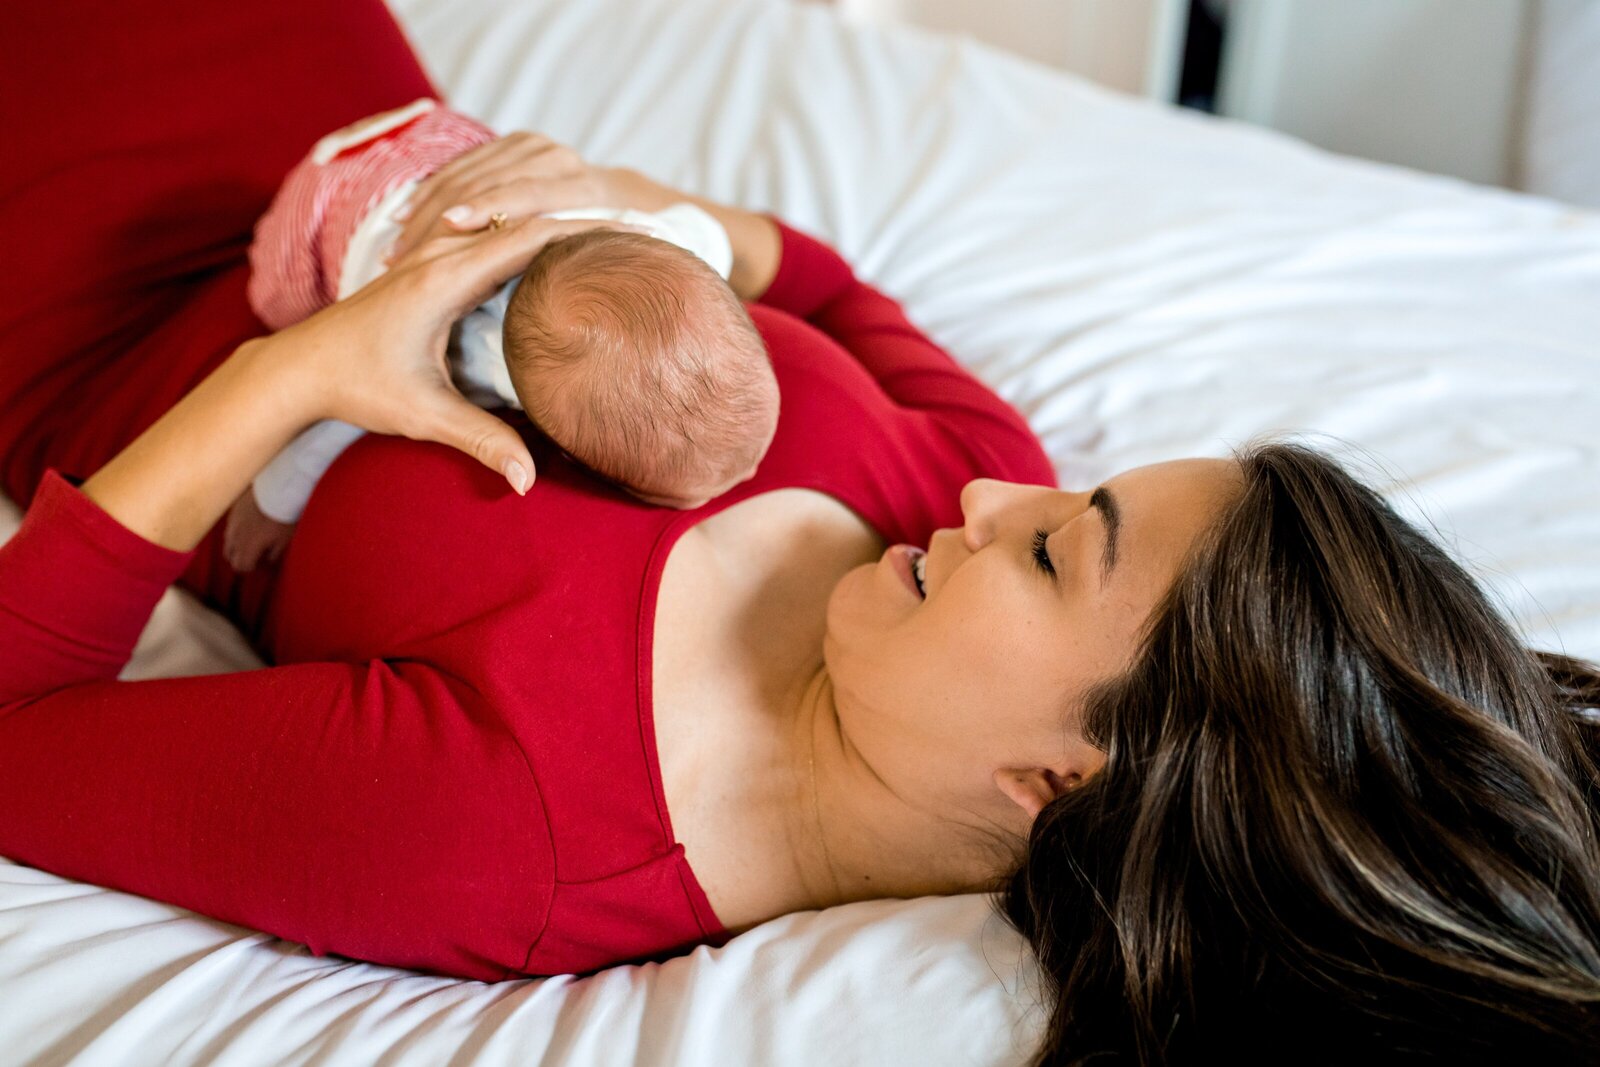 Newborn lying on mom's chest during newborn photography session.